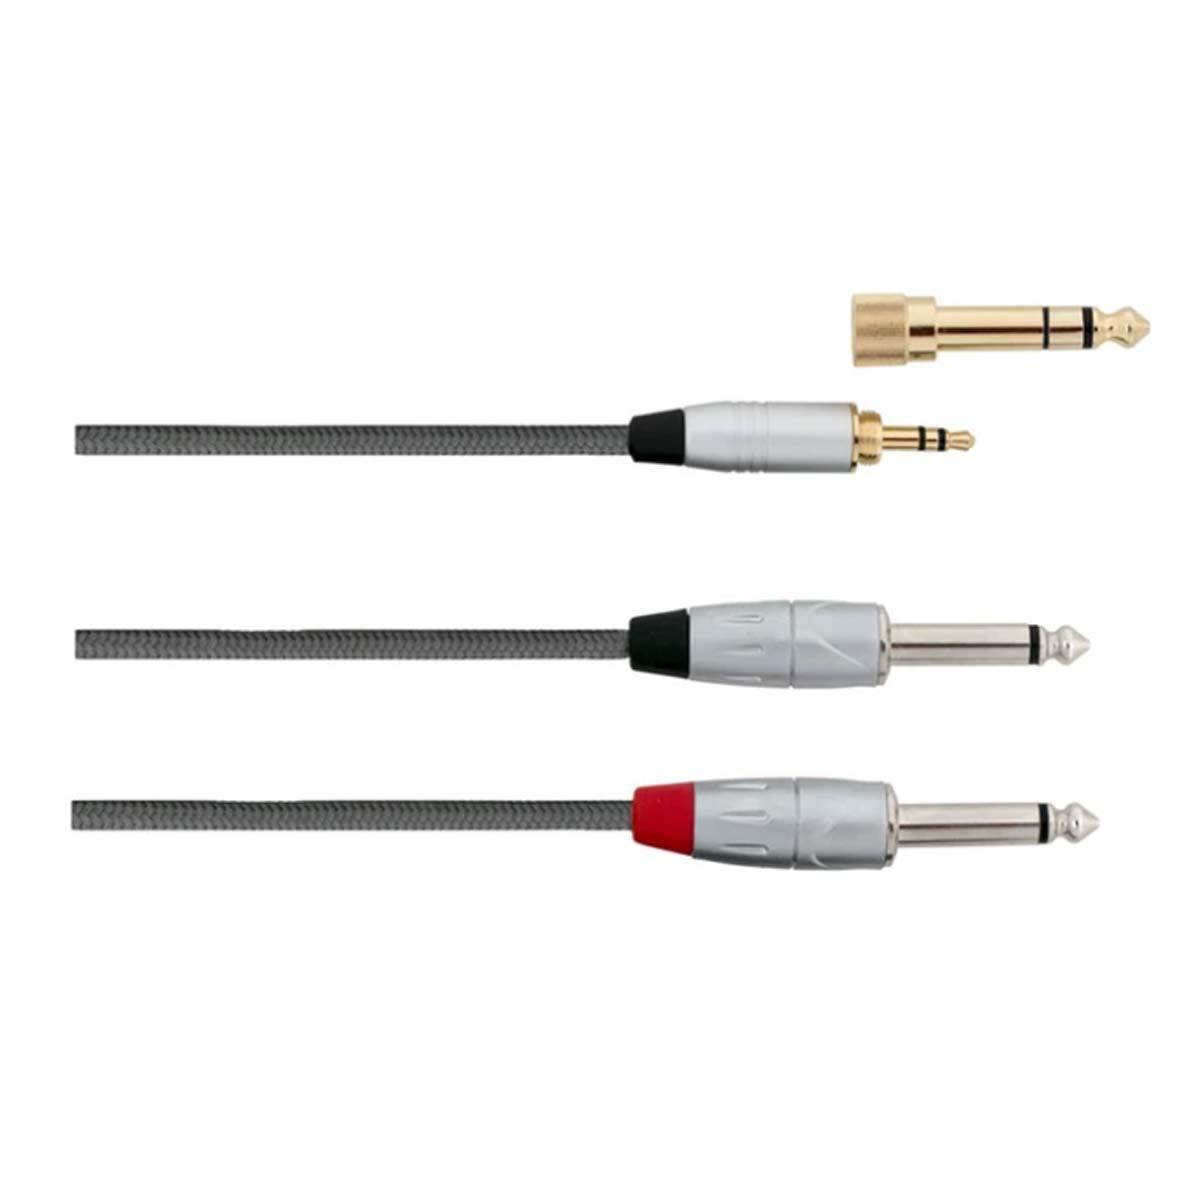 Carson Rocklines YHQ3 - 3.5 Stereo Jack Plug Male with 6.3 Adaptor to 2 x 6.3 Mono Jack Plugs (male) - 6 foot